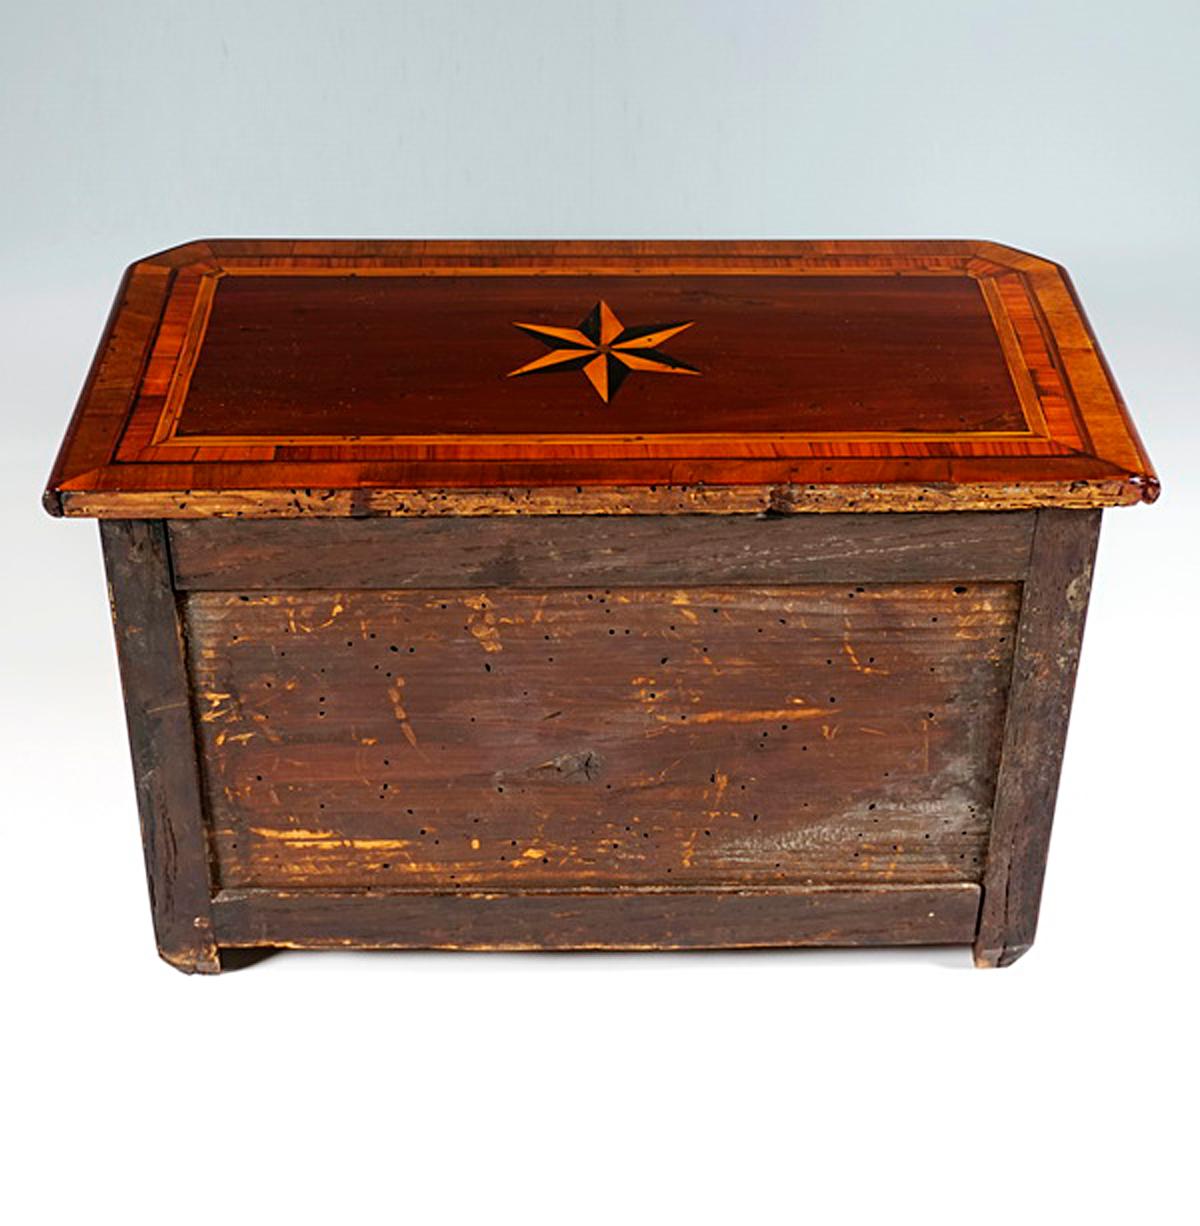 Fruitwood Josefinian Model Chest Of Drawers With Fine Marquetry, Vienna, ca 1770/1780